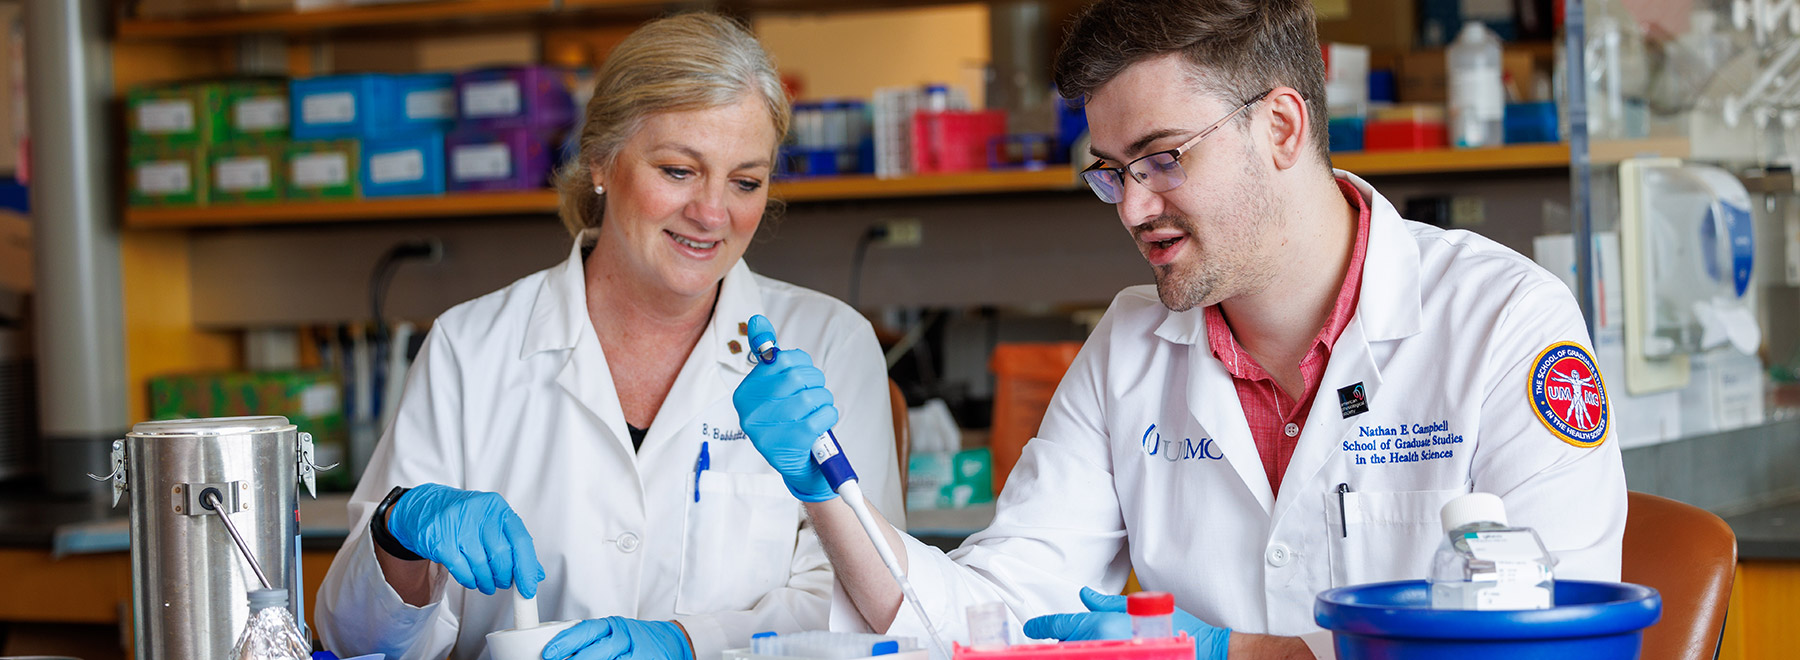 UMMC scientists Dr. Dr. Babette Lamarca and Dr. Nathan Campbell working in the laboratory.